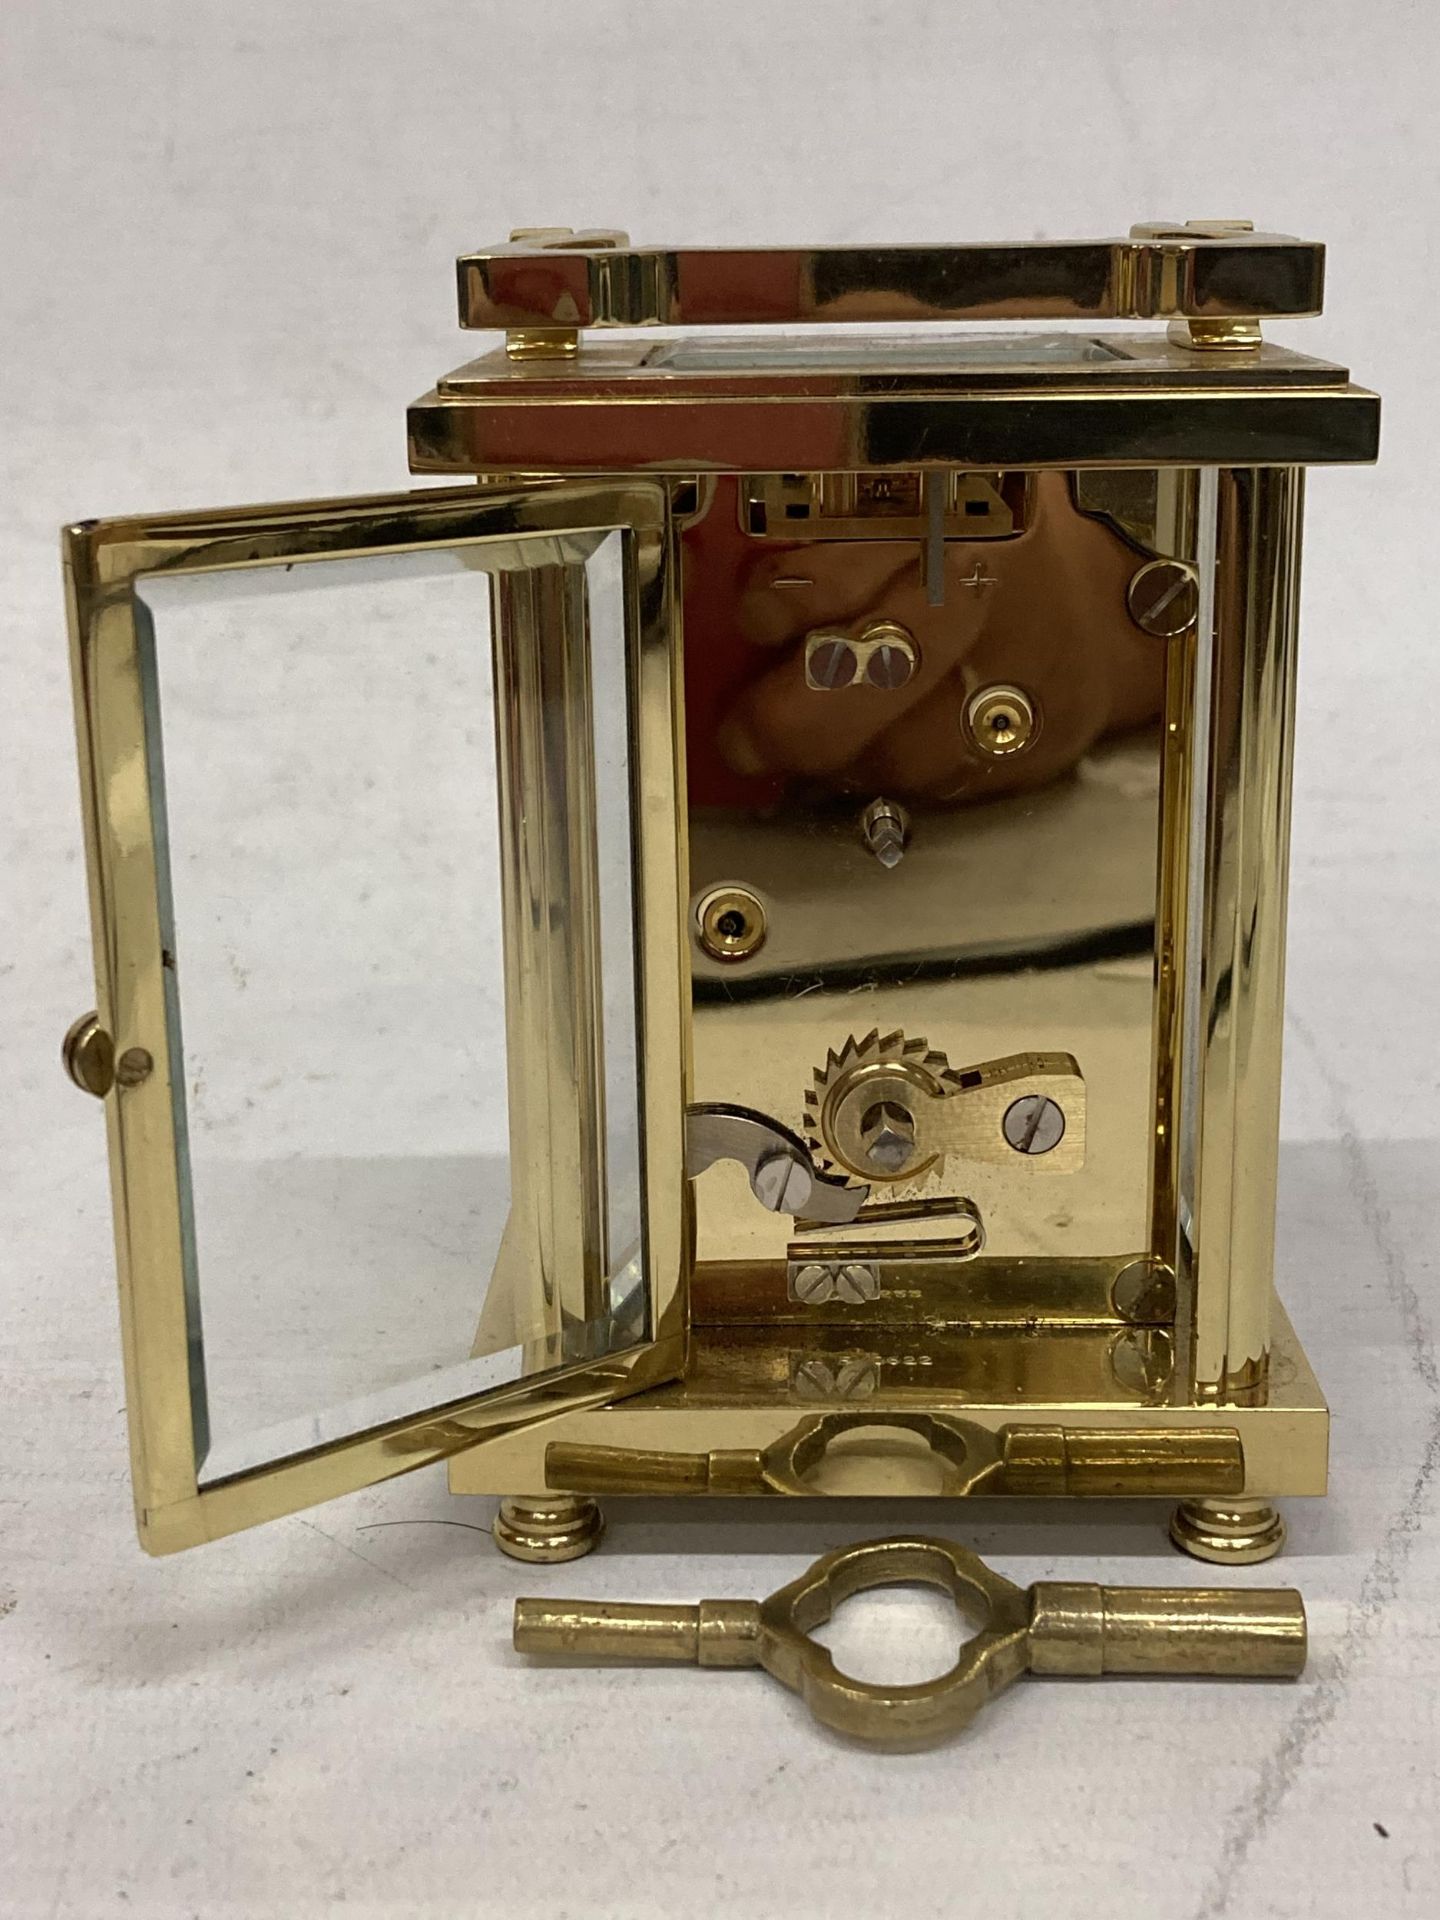 A WATCHES OF SWITZERLAND BRASS CARRIAGE CLOCK - Image 3 of 4